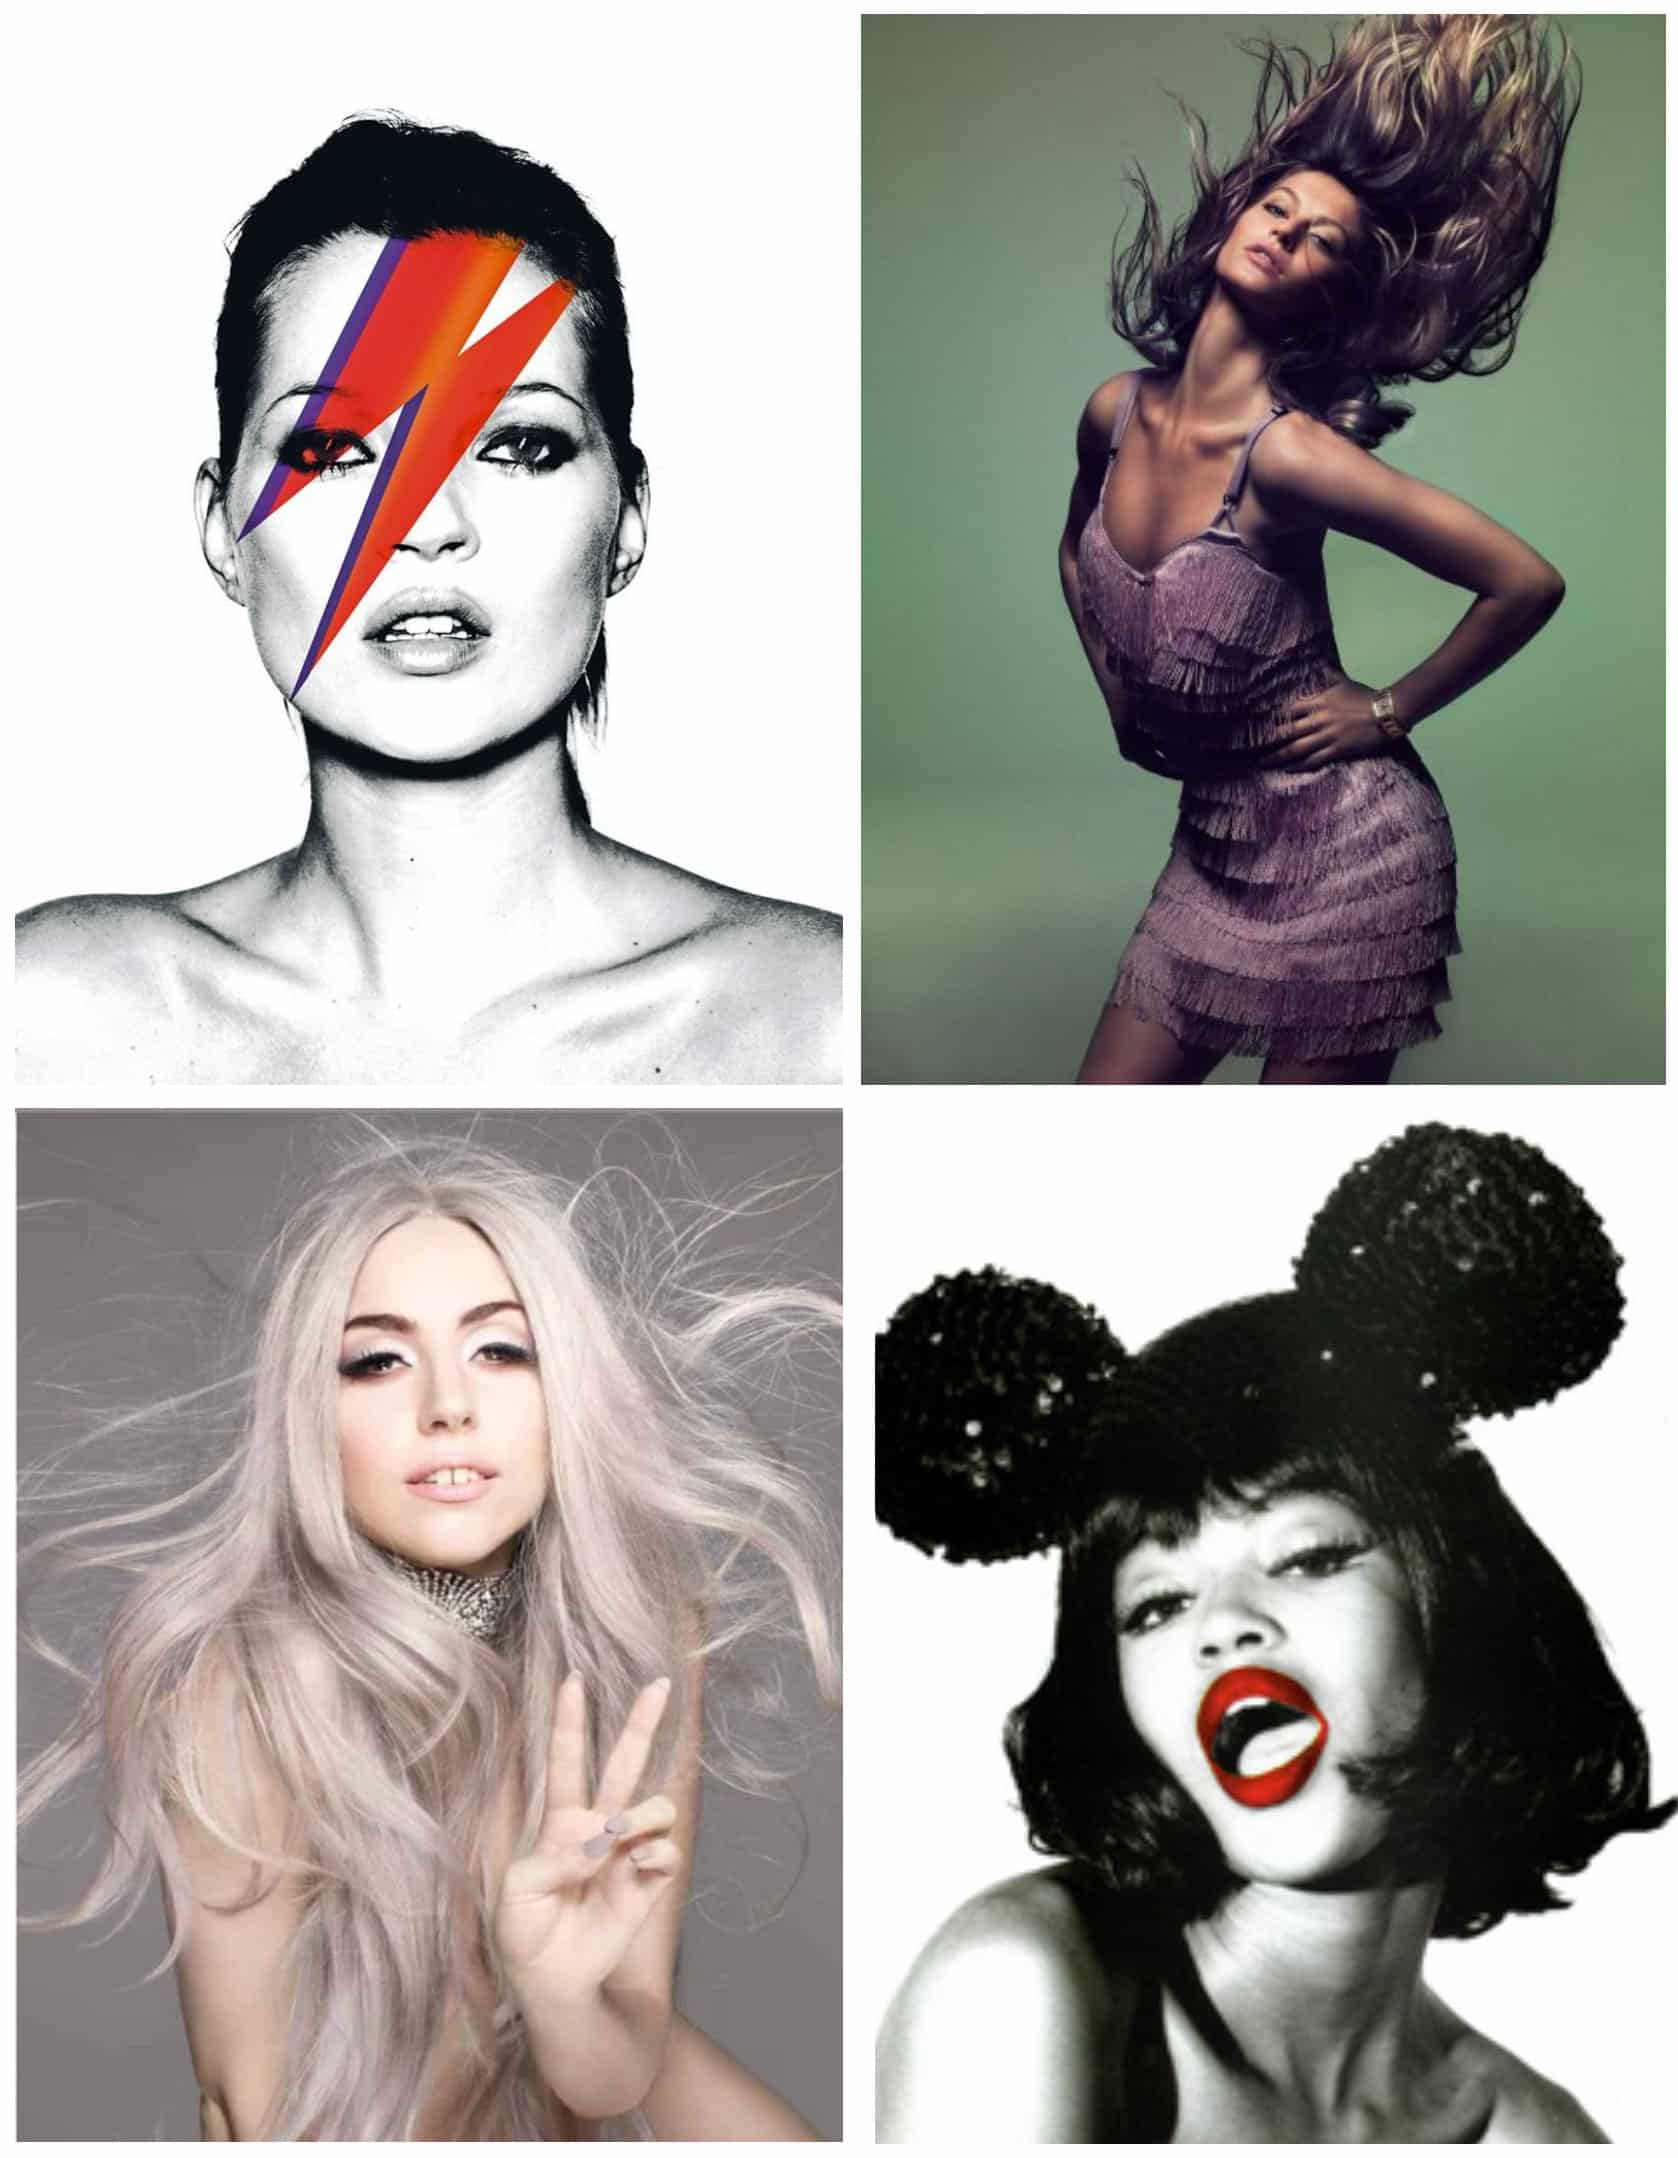 Clockwise from top left:Kate Moss by Nick Knight; Gisele Bundchen by Alexei Hay; Naomi Campbell by Ellen von Unwerth; Lady Gaga by Nick Knight. All hair by Sam McKnight.